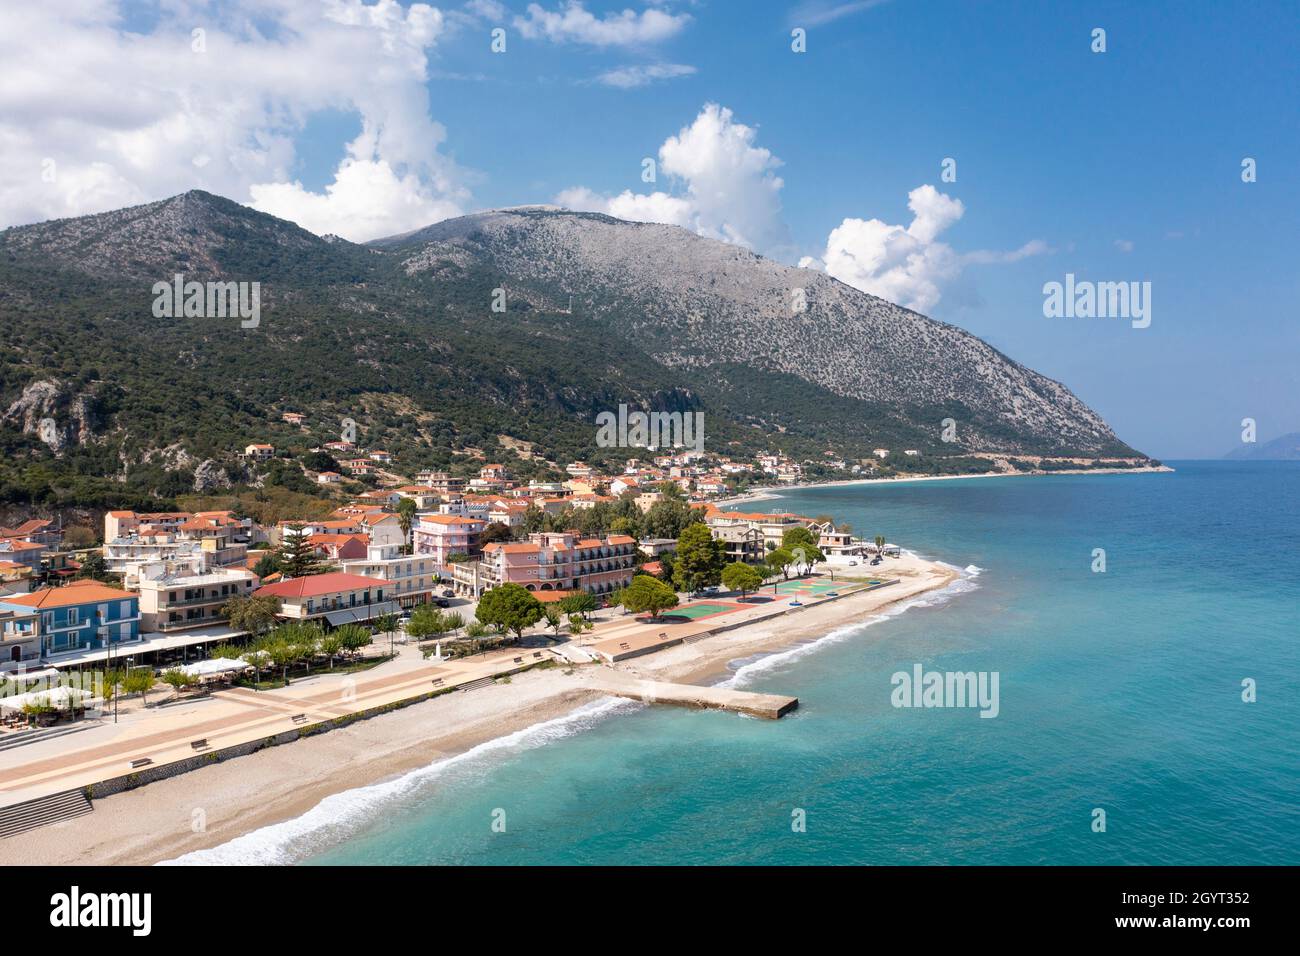 Aerial view of the small town of Poros on the southeast coast of Kefalonia, Ionian Islands, Greece Stock Photo